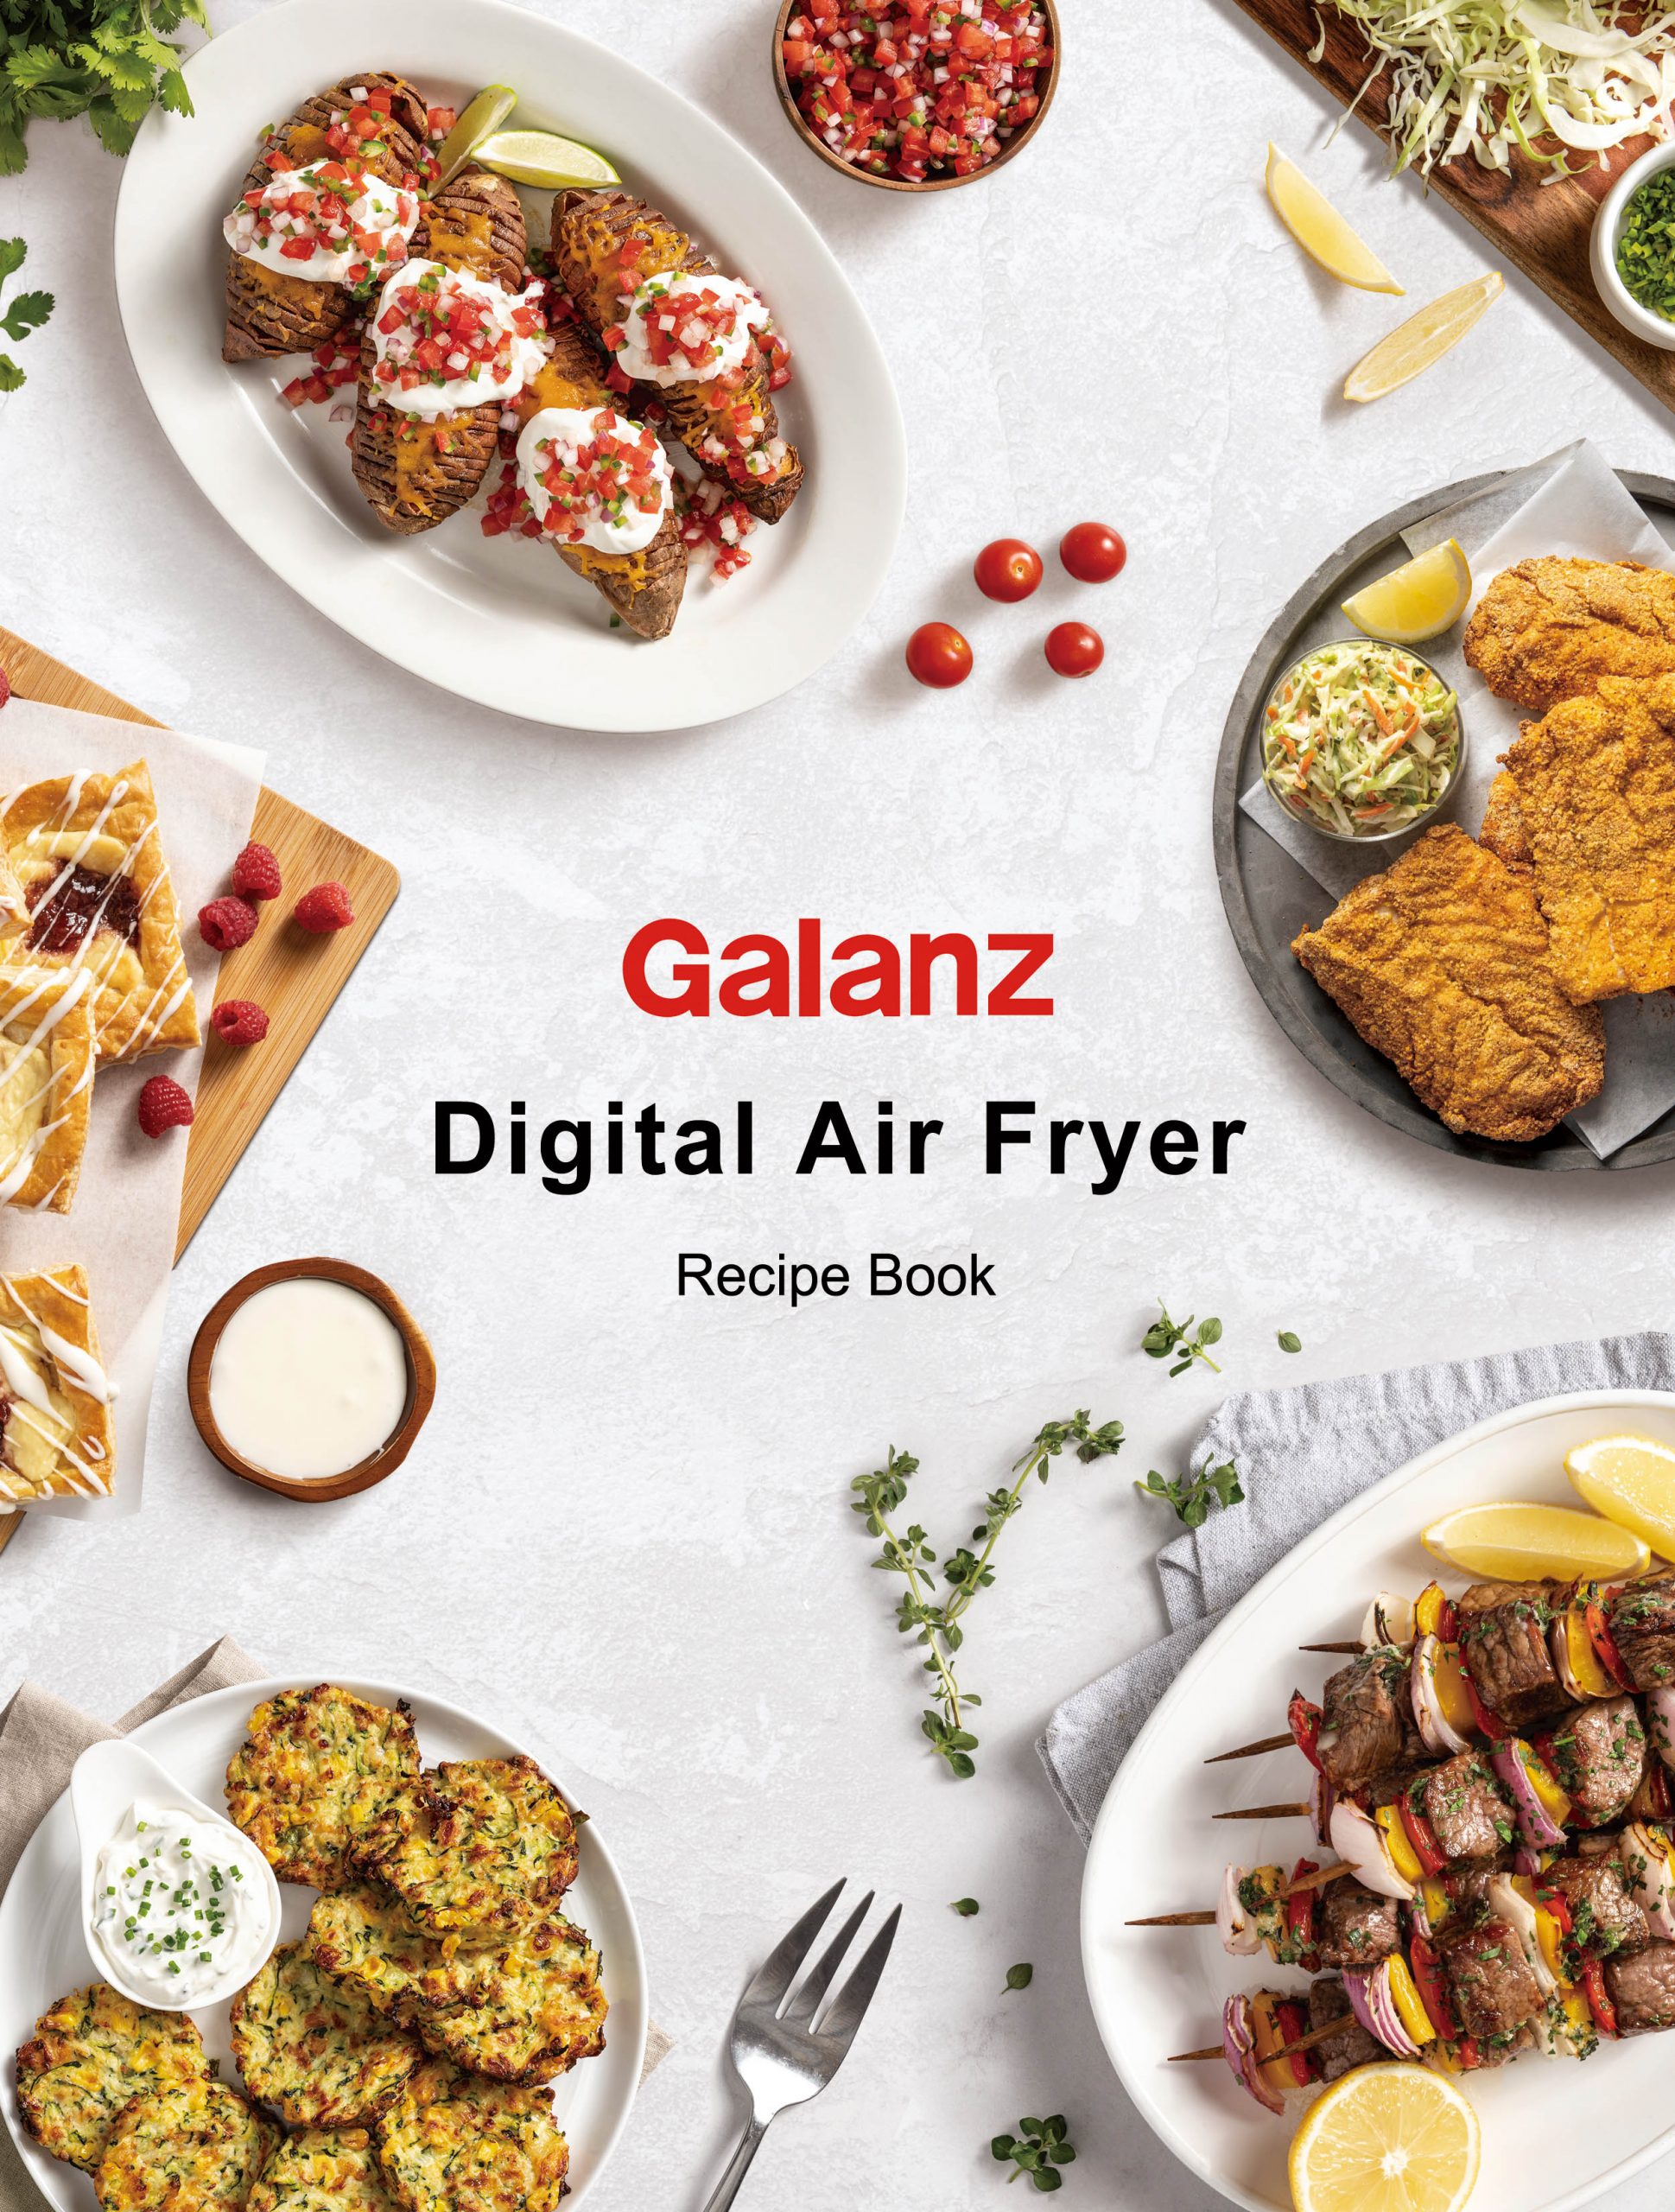 https://www.galanz.com/us/wp-content/uploads/2022/01/Air-Fryer-Recipe-Cover-scaled.jpg